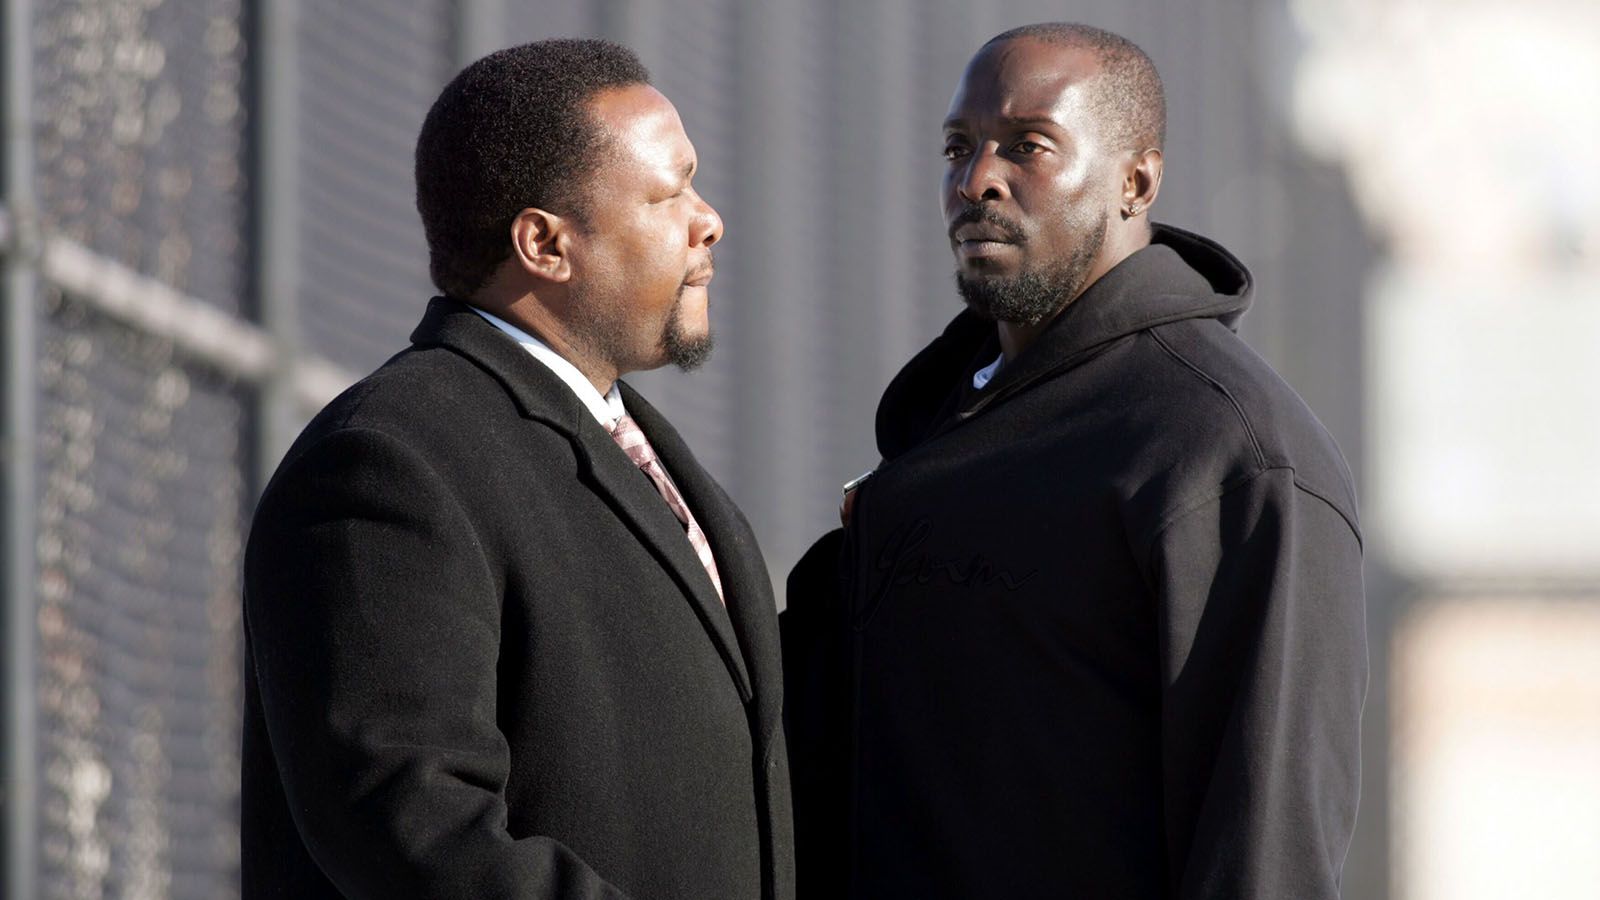 'The Wire' is always among the top TV series mentioned in favorite lists.